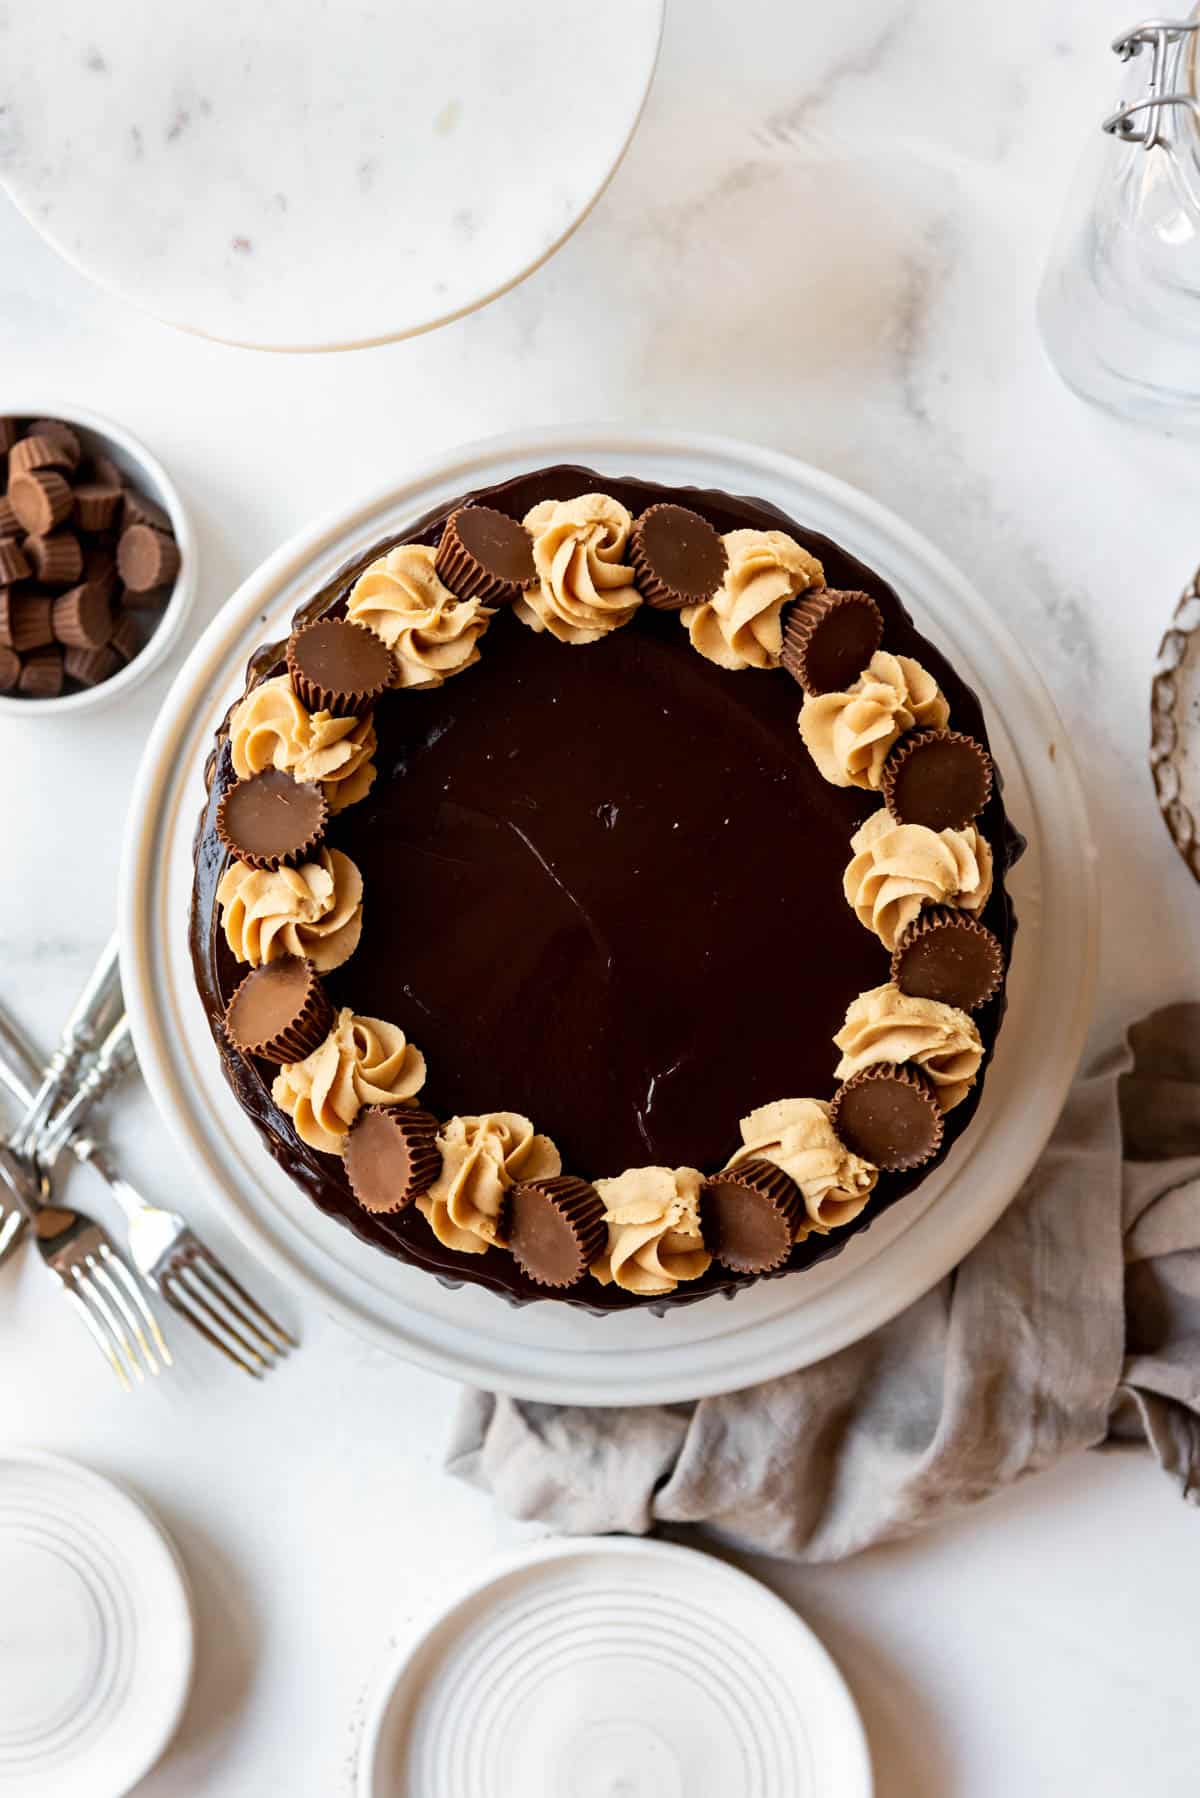 Top view of a Chocolate Peanut Butter Cake with swirls of peanut butter frosting and mini peanut butter cups on top of chocolate ganache.